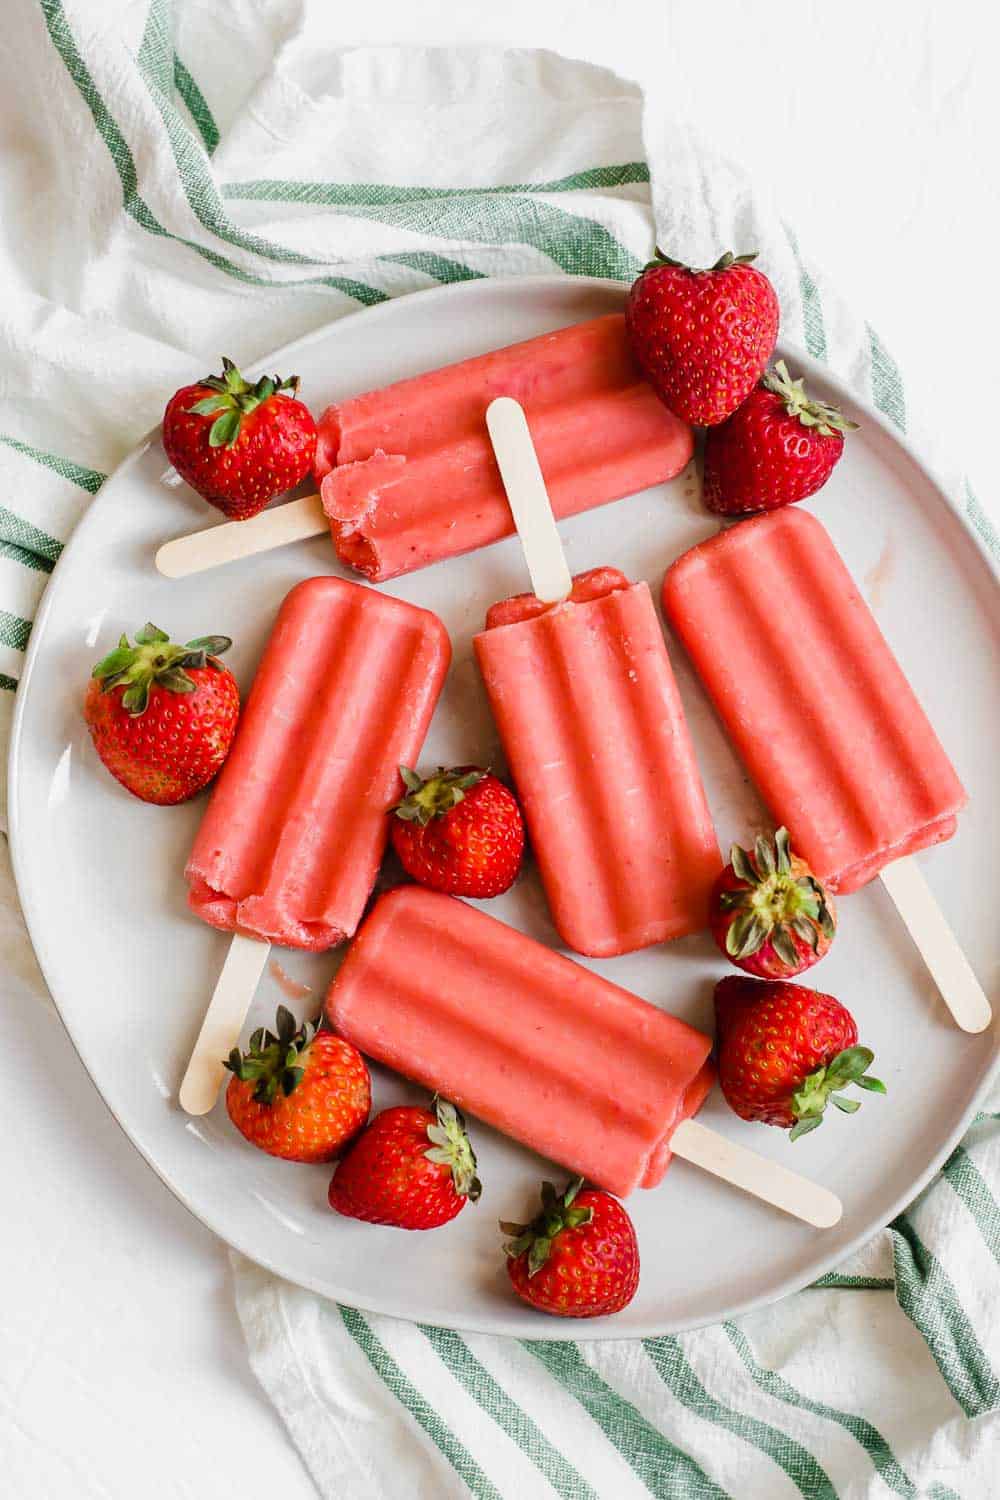 These healthy strawberry popsicles (vegan, paleo) contain only four ingredients and are incredible easy to make with only 5 minutes of prep! || The Butter Half #popsiclerecipe #healthypopsicles #easypopsicles #strawberrypopsicles #veganrecipes #paleorecipes #thebutterhalf